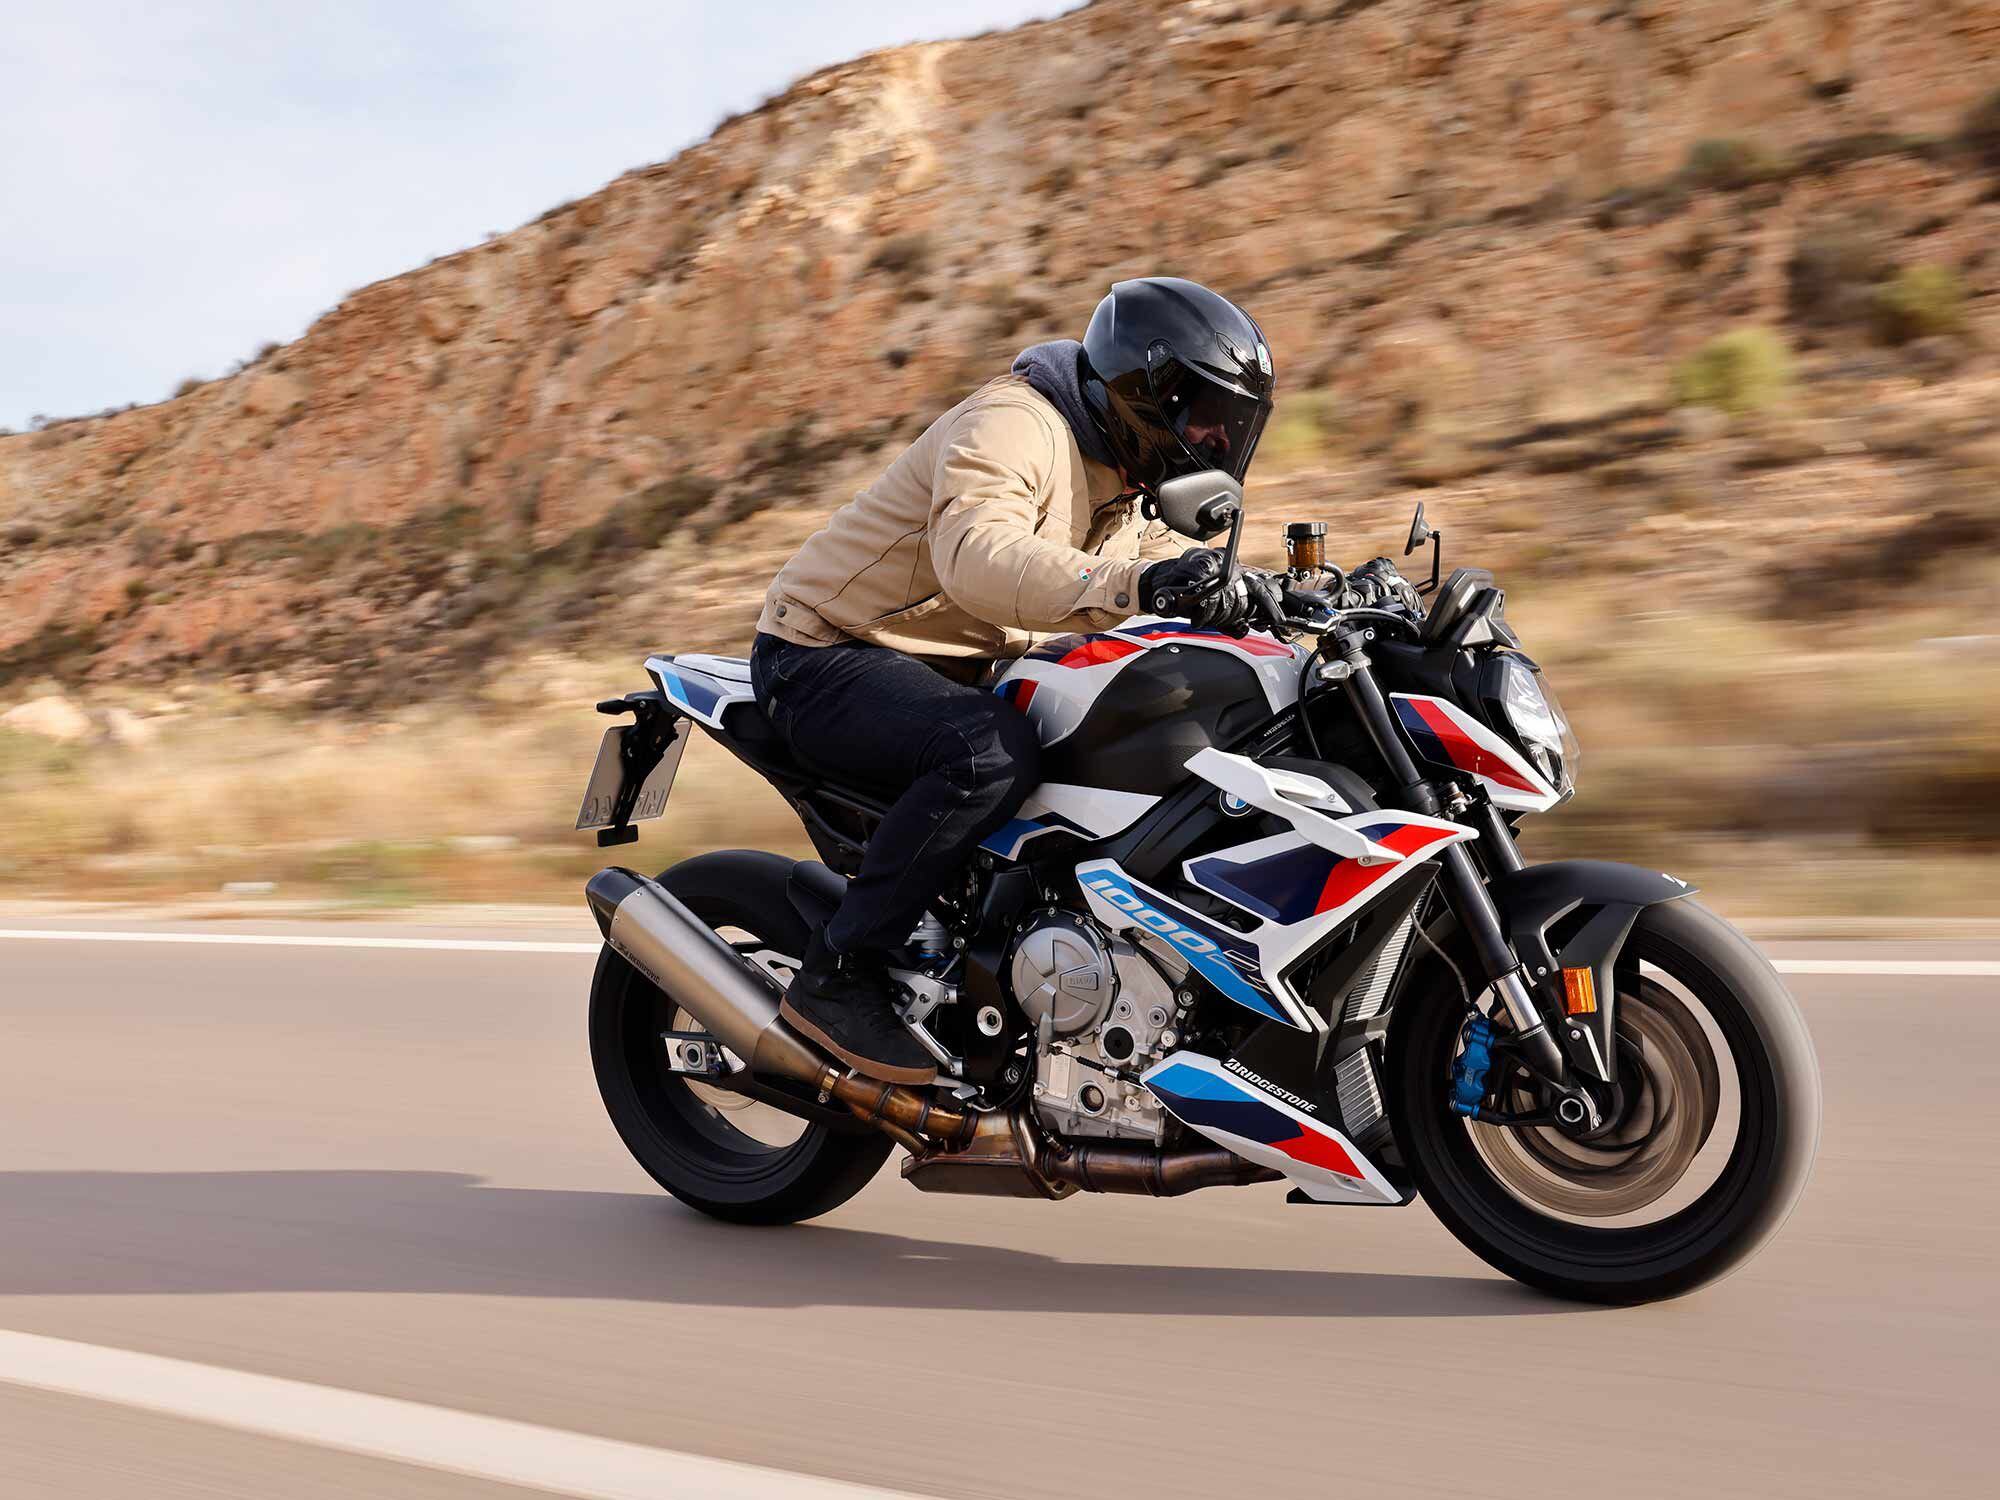 The M 1000 R is simply one of the most insane nakeds currently sold, and by far BMW’s gnarliest roadster to date.